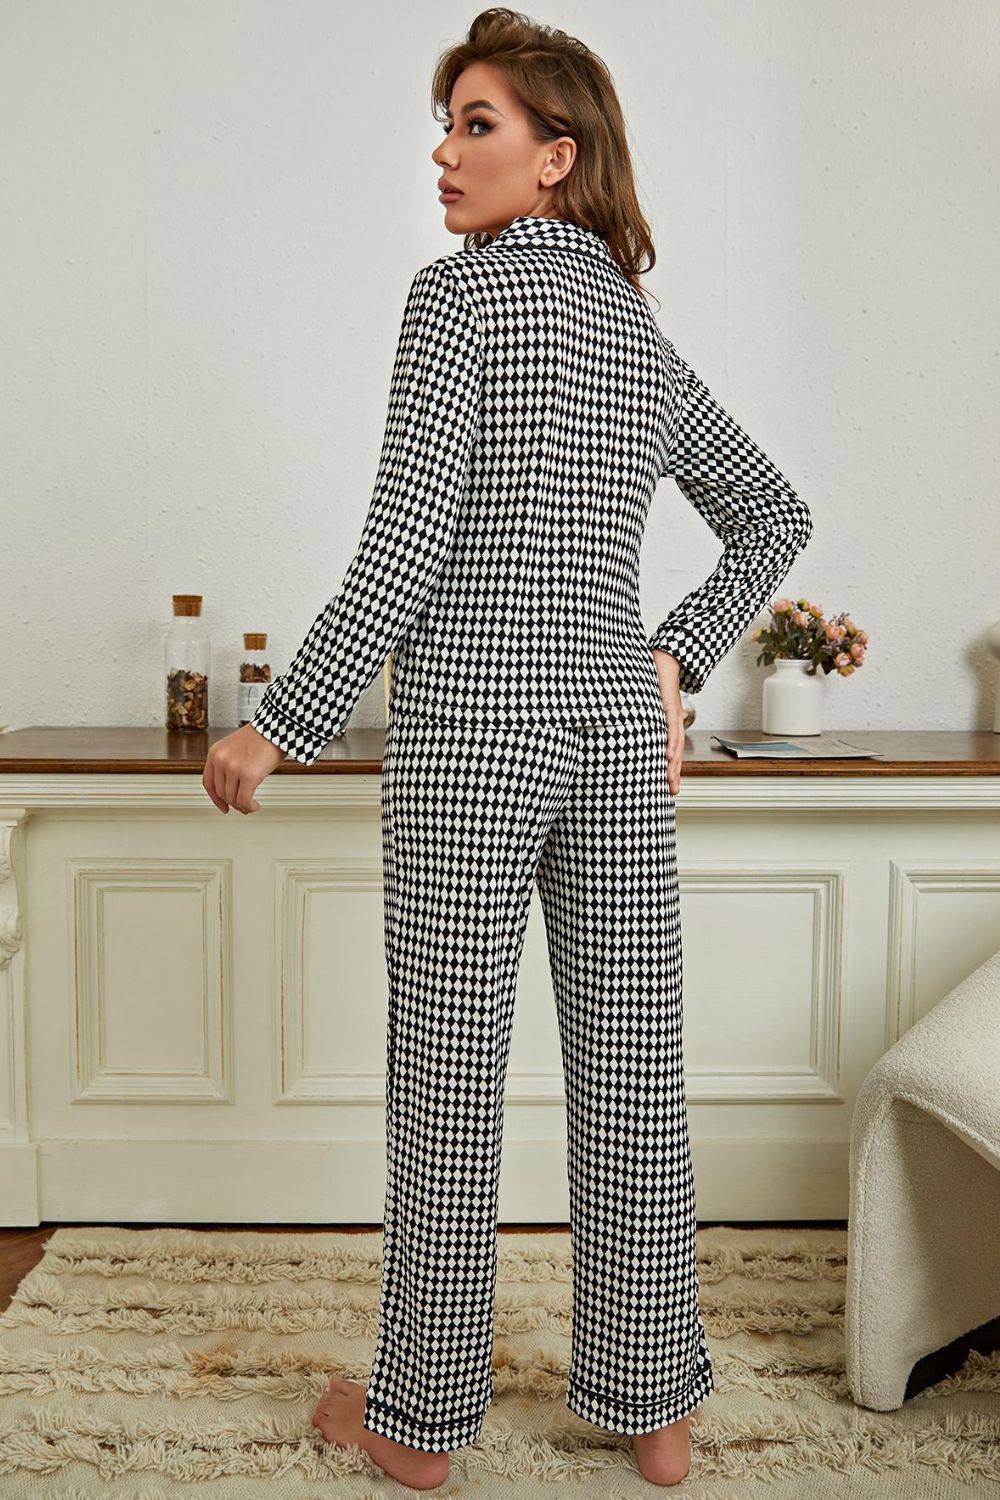 Whoopsie Daisy-Checkered Button Front Top and Pants Loungewear Set-Whoopsie Daisy